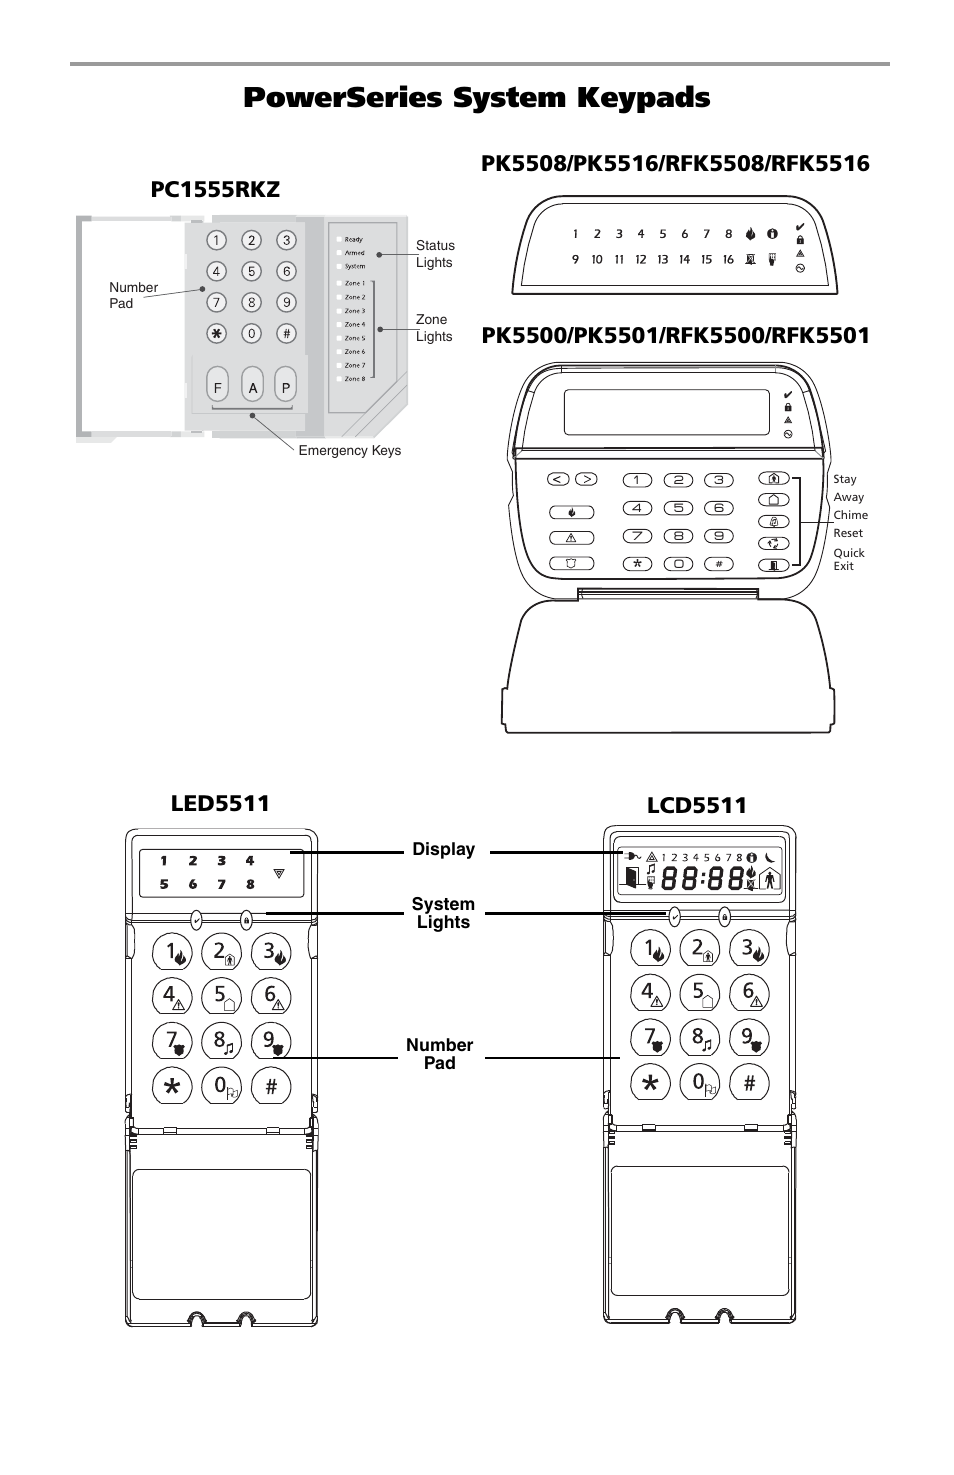 Powerseries system keypads, Led5511 | DSC POWERSERIES PC1616 User Manual | Page 6 / 24